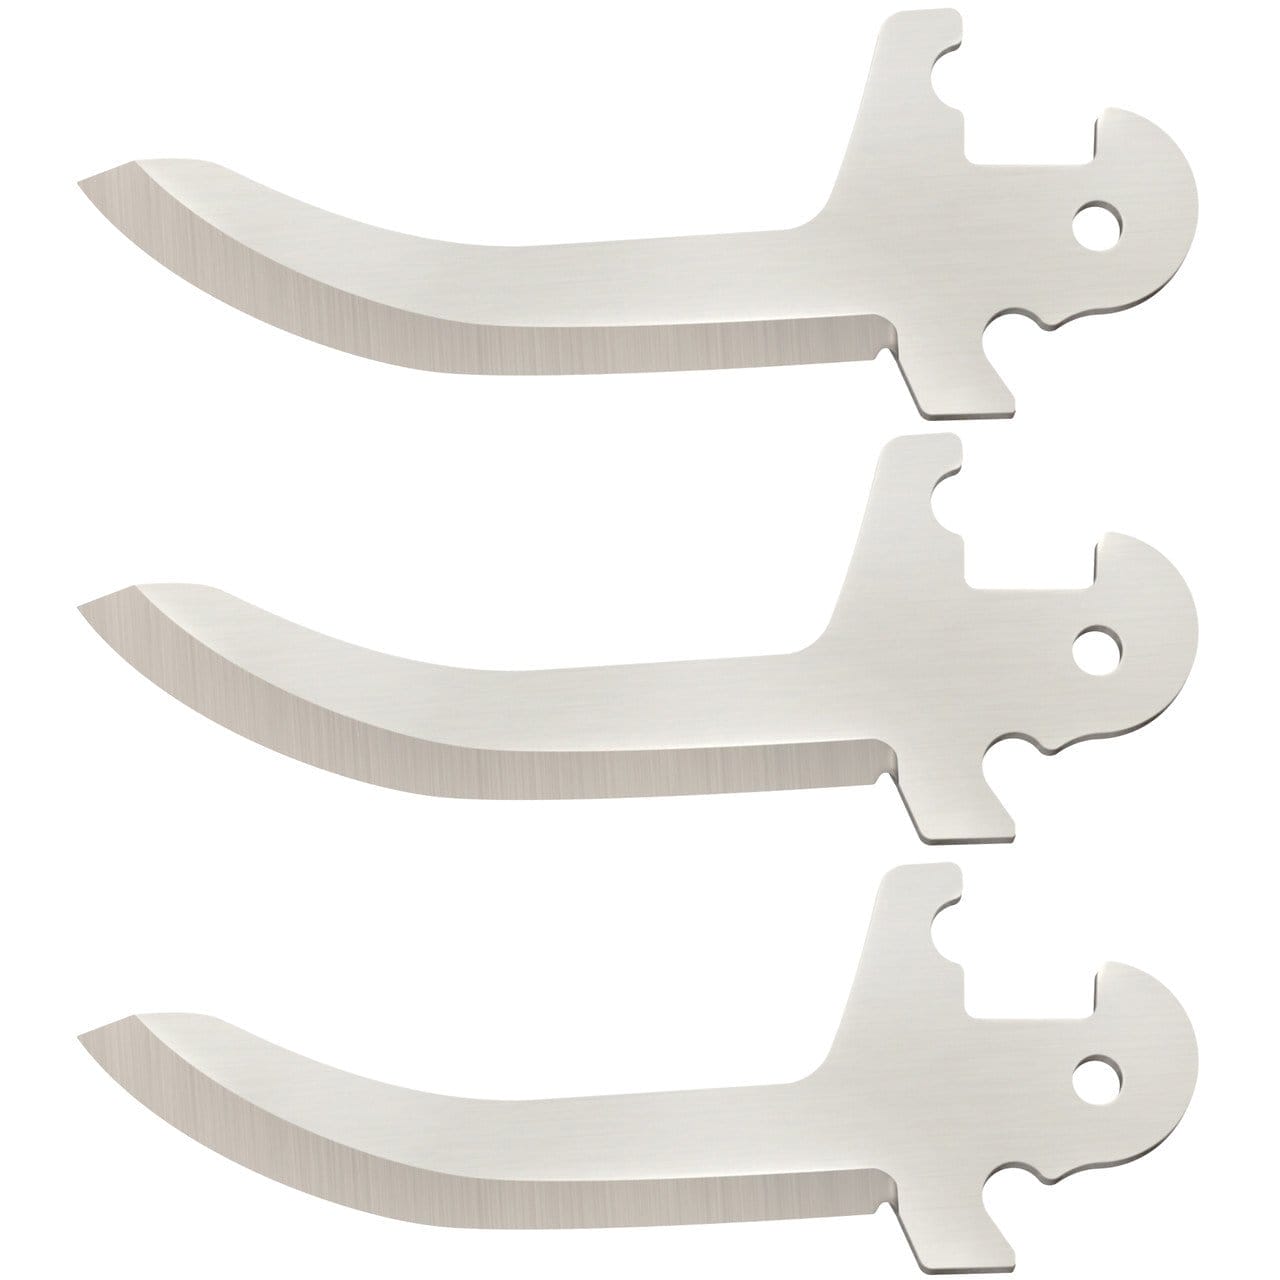 Image of CLICK N CUT BLADES 3 PACK - CAPING BLADE